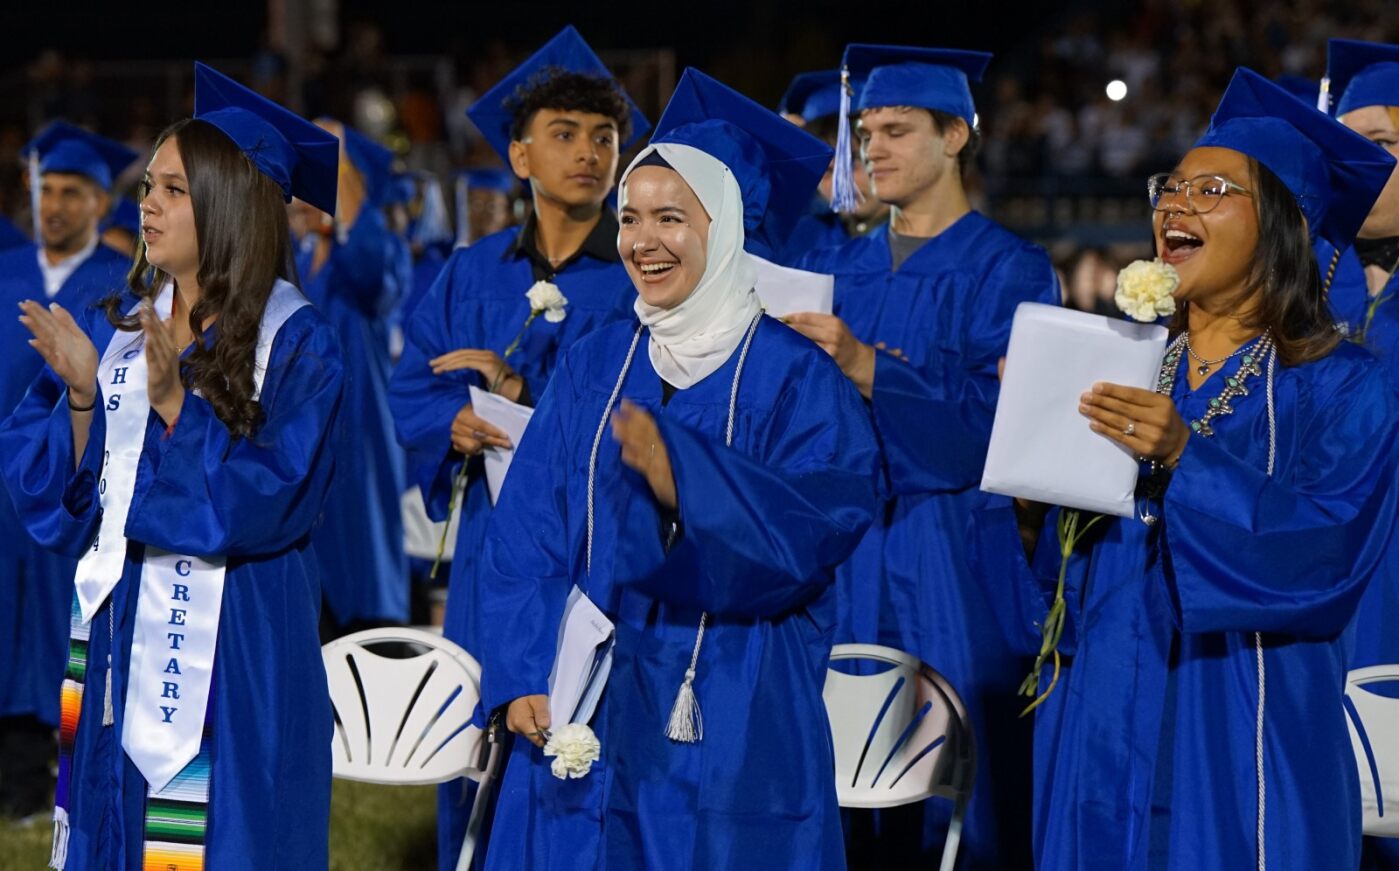 Catalina grads smile and clap during the ceremony